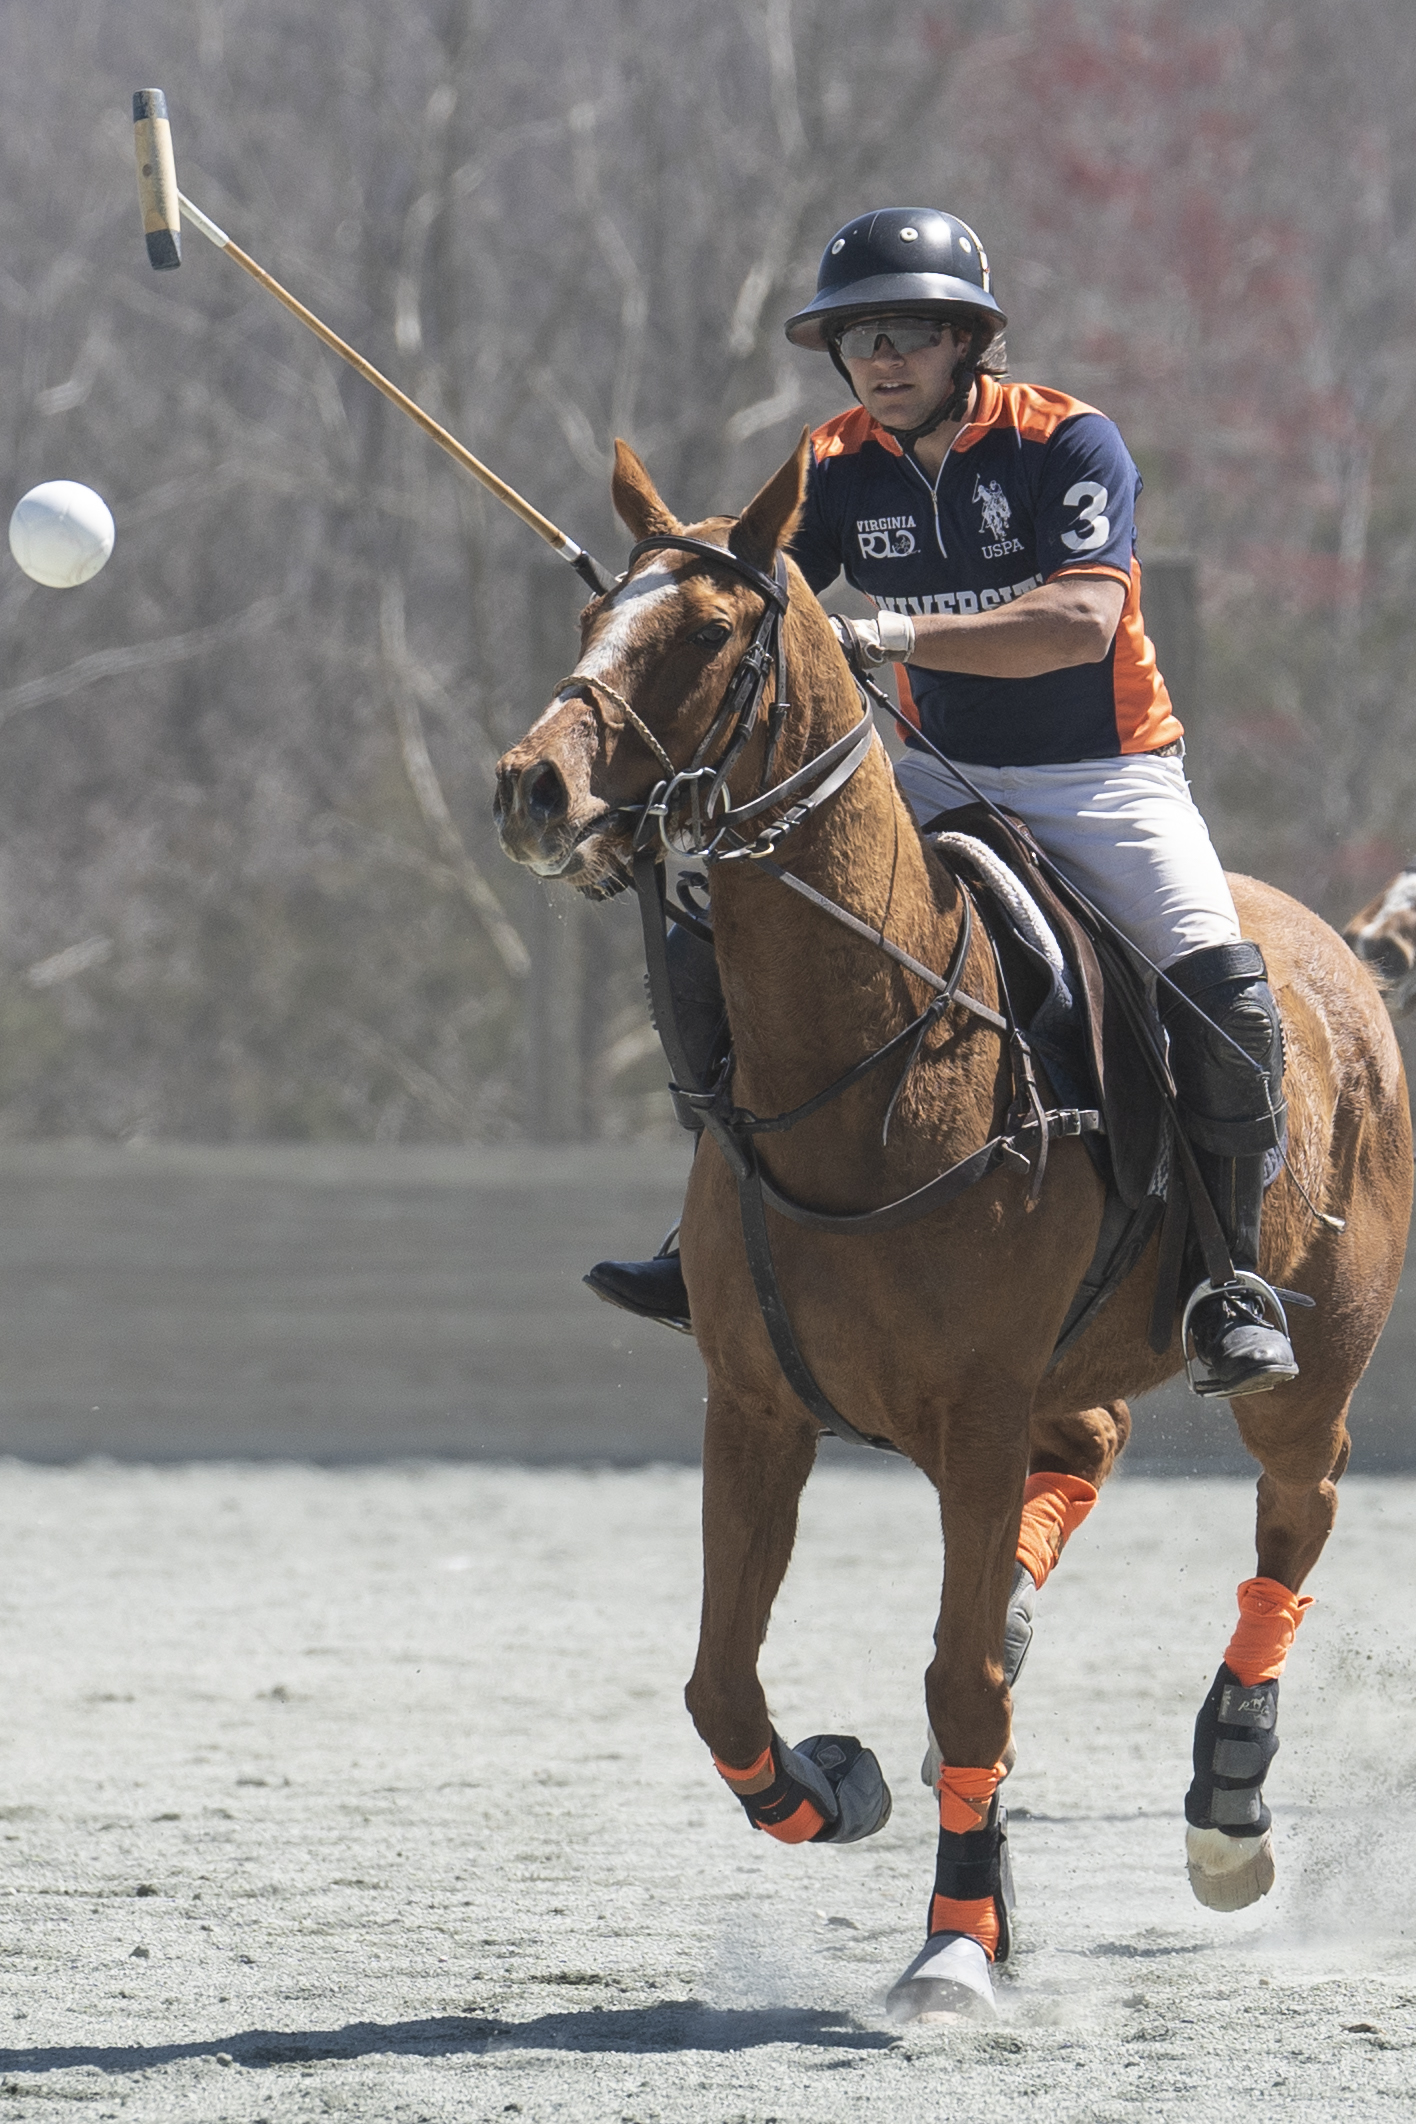 Parker Pearce, captain of the men’s varsity and president of the Virginia Polo Club